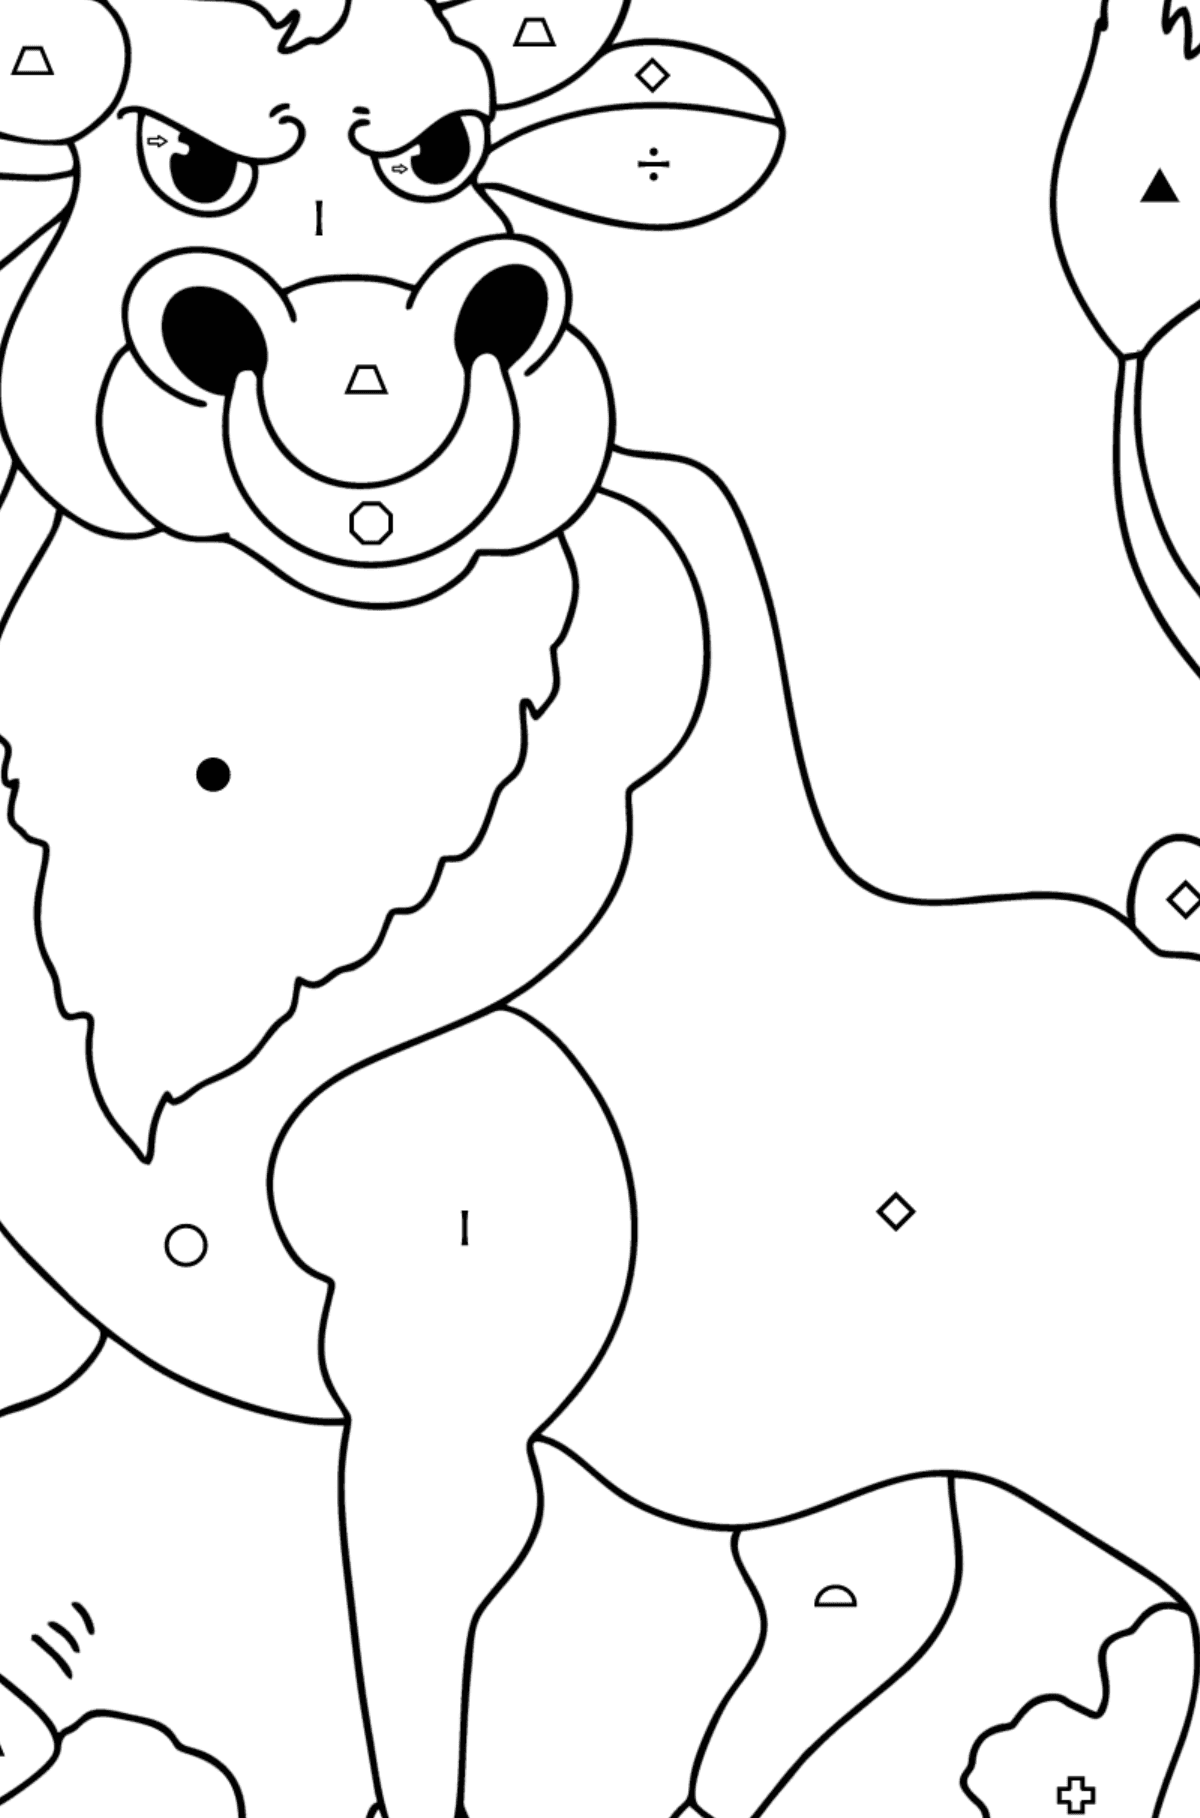 Brave bull Coloring page - Coloring by Symbols and Geometric Shapes for Kids